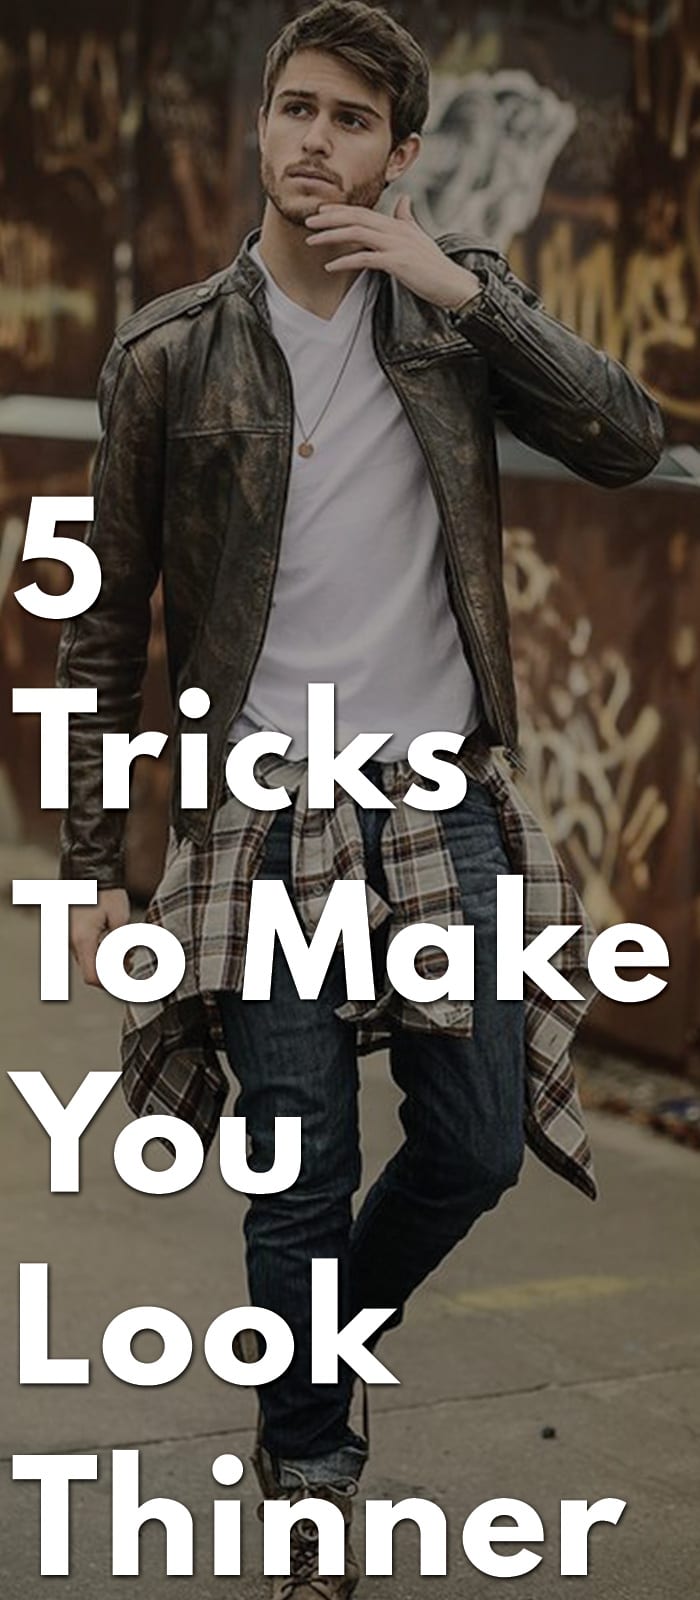 5-Tricks-To-Make-You-Look-Thinner